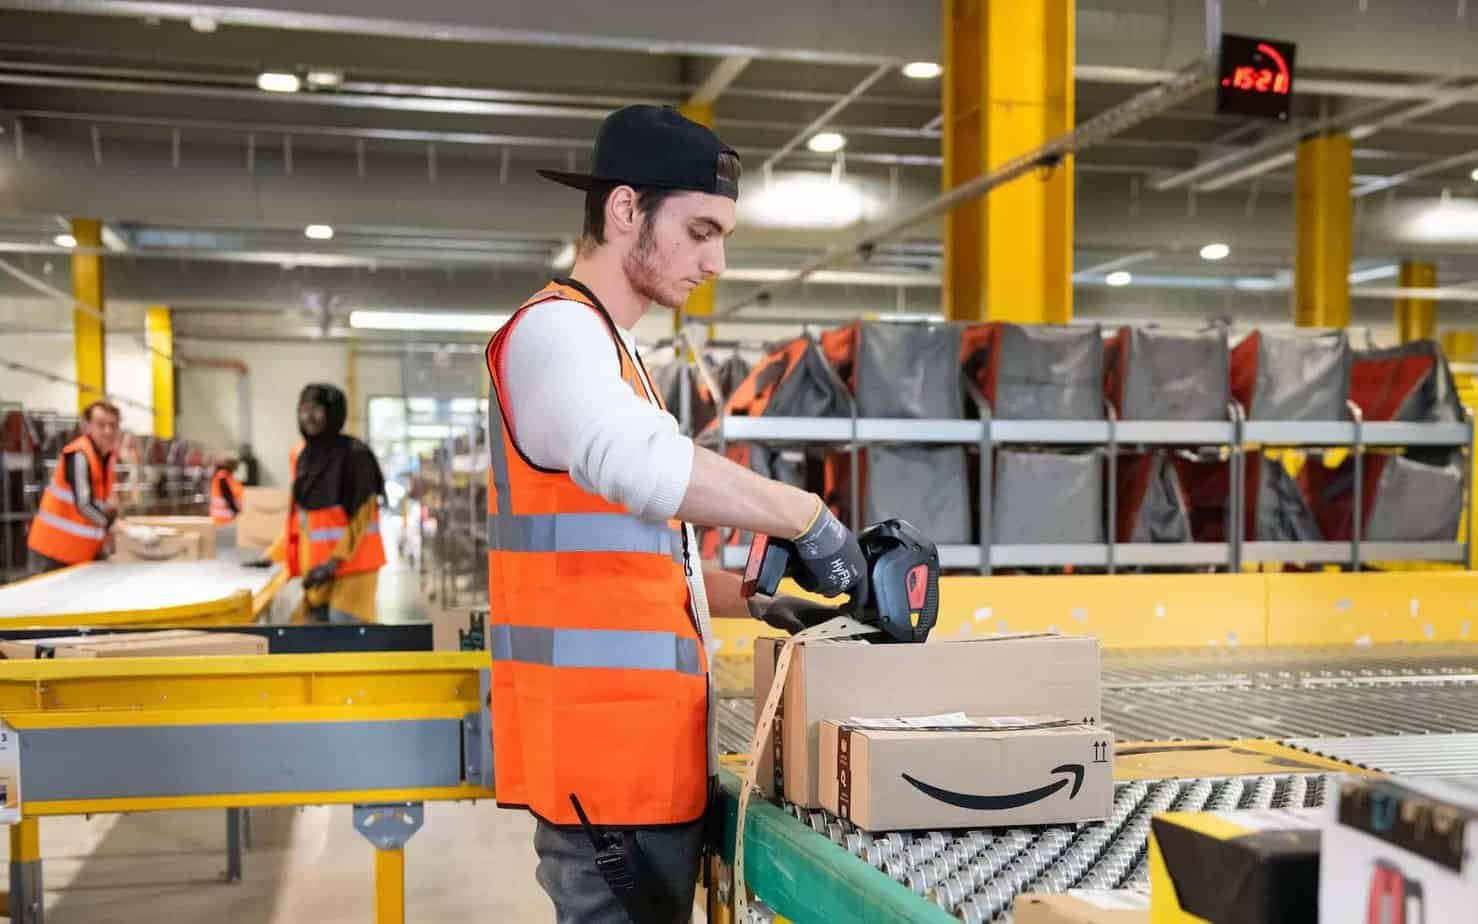 Amazon Wants To Retrain Its Employees, As A Part of "Upskilling 2025" Initiative